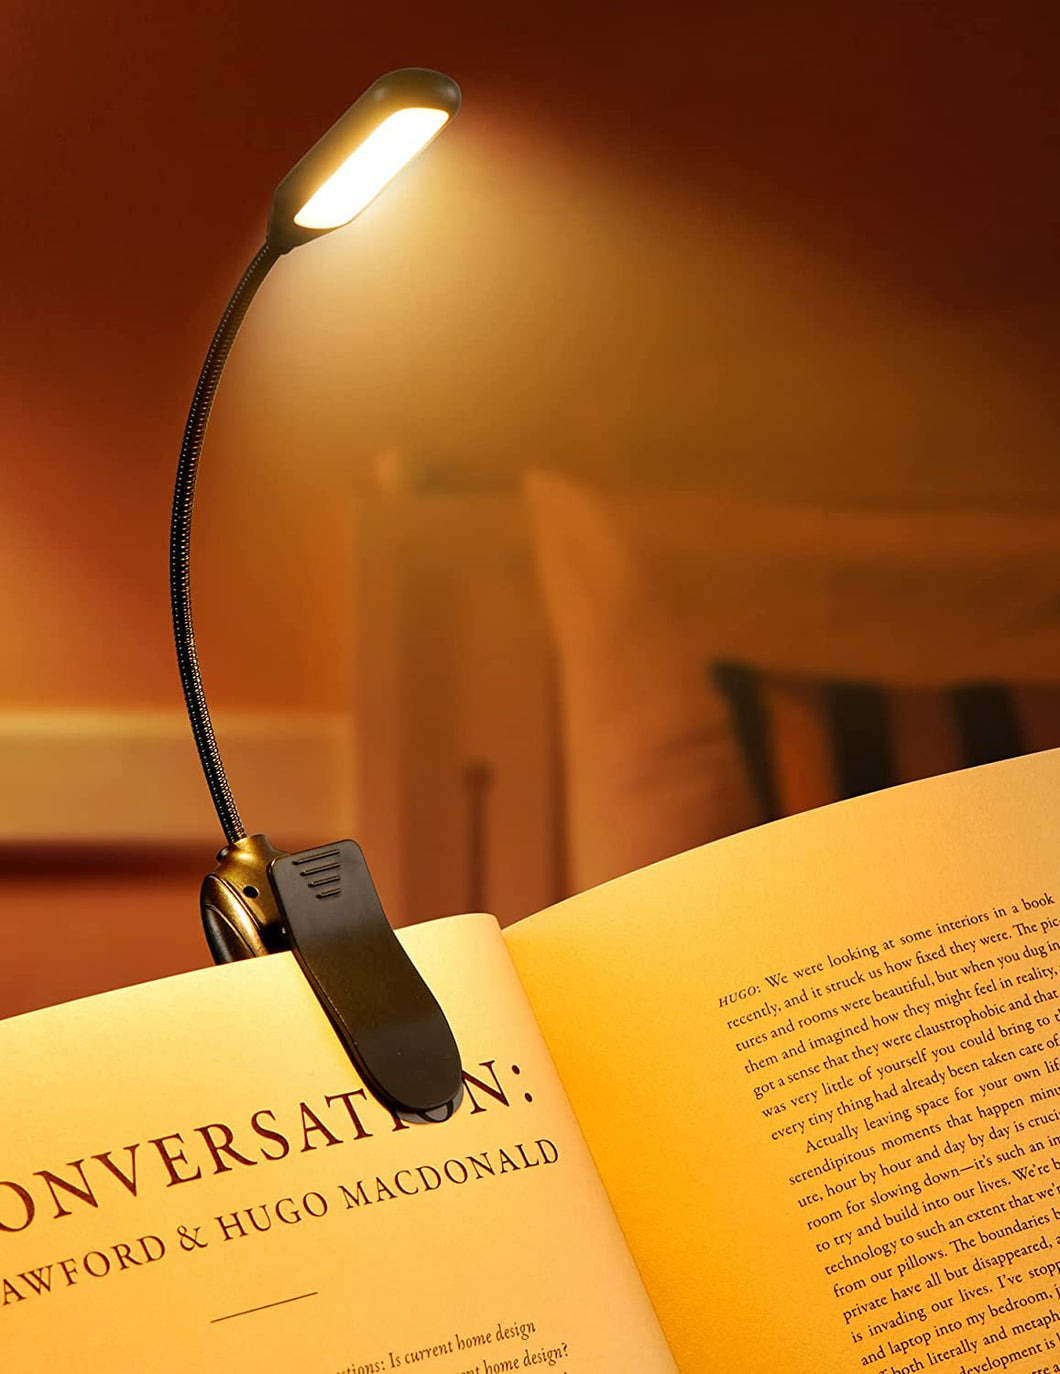 Book Light for Reading in Bed, 3 Brightness Levels × 3 Color Temperatures, 70 Hours Runtime Rechargeable Book Light Clip On, 1.3 Oz Lightweight Small Book Reading Light for Reading in Bed